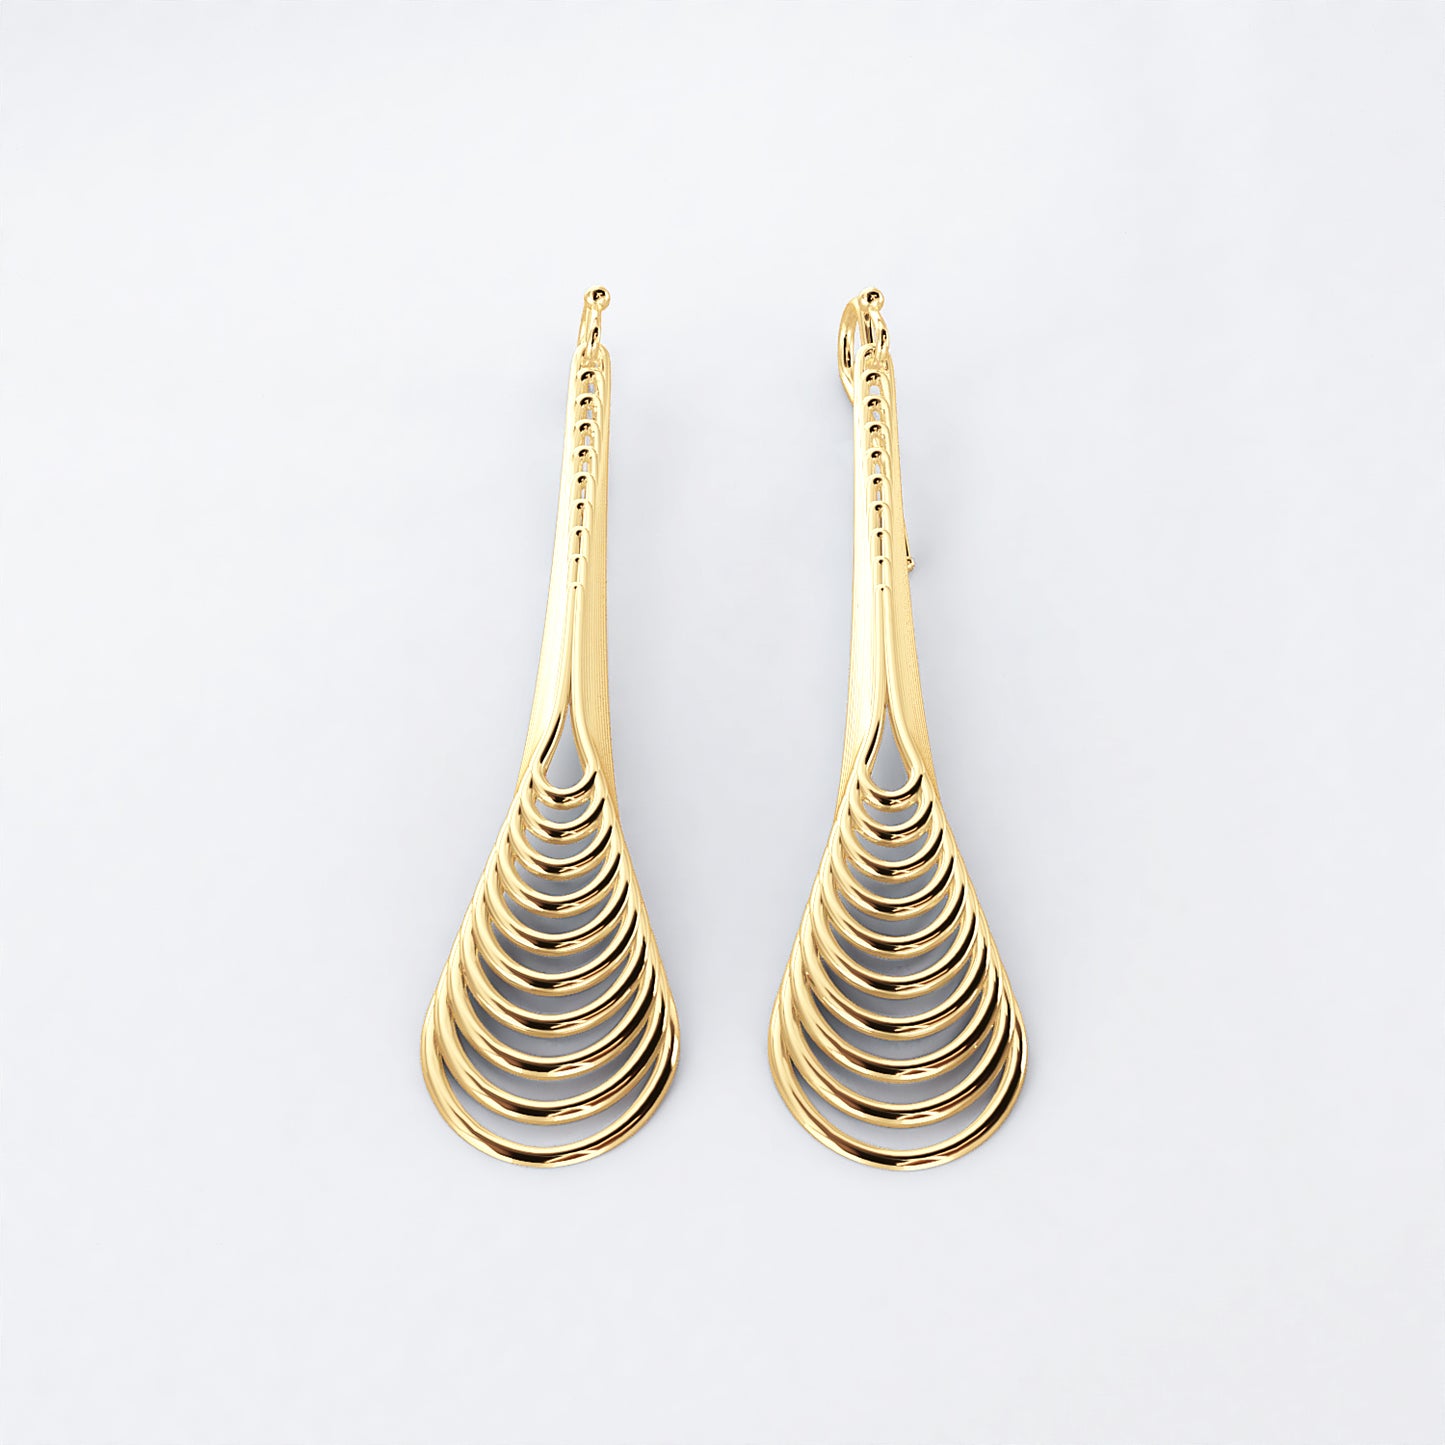 Beginning: 18ct Yellow Gold-Plated Sterling Silver Drop Earrings